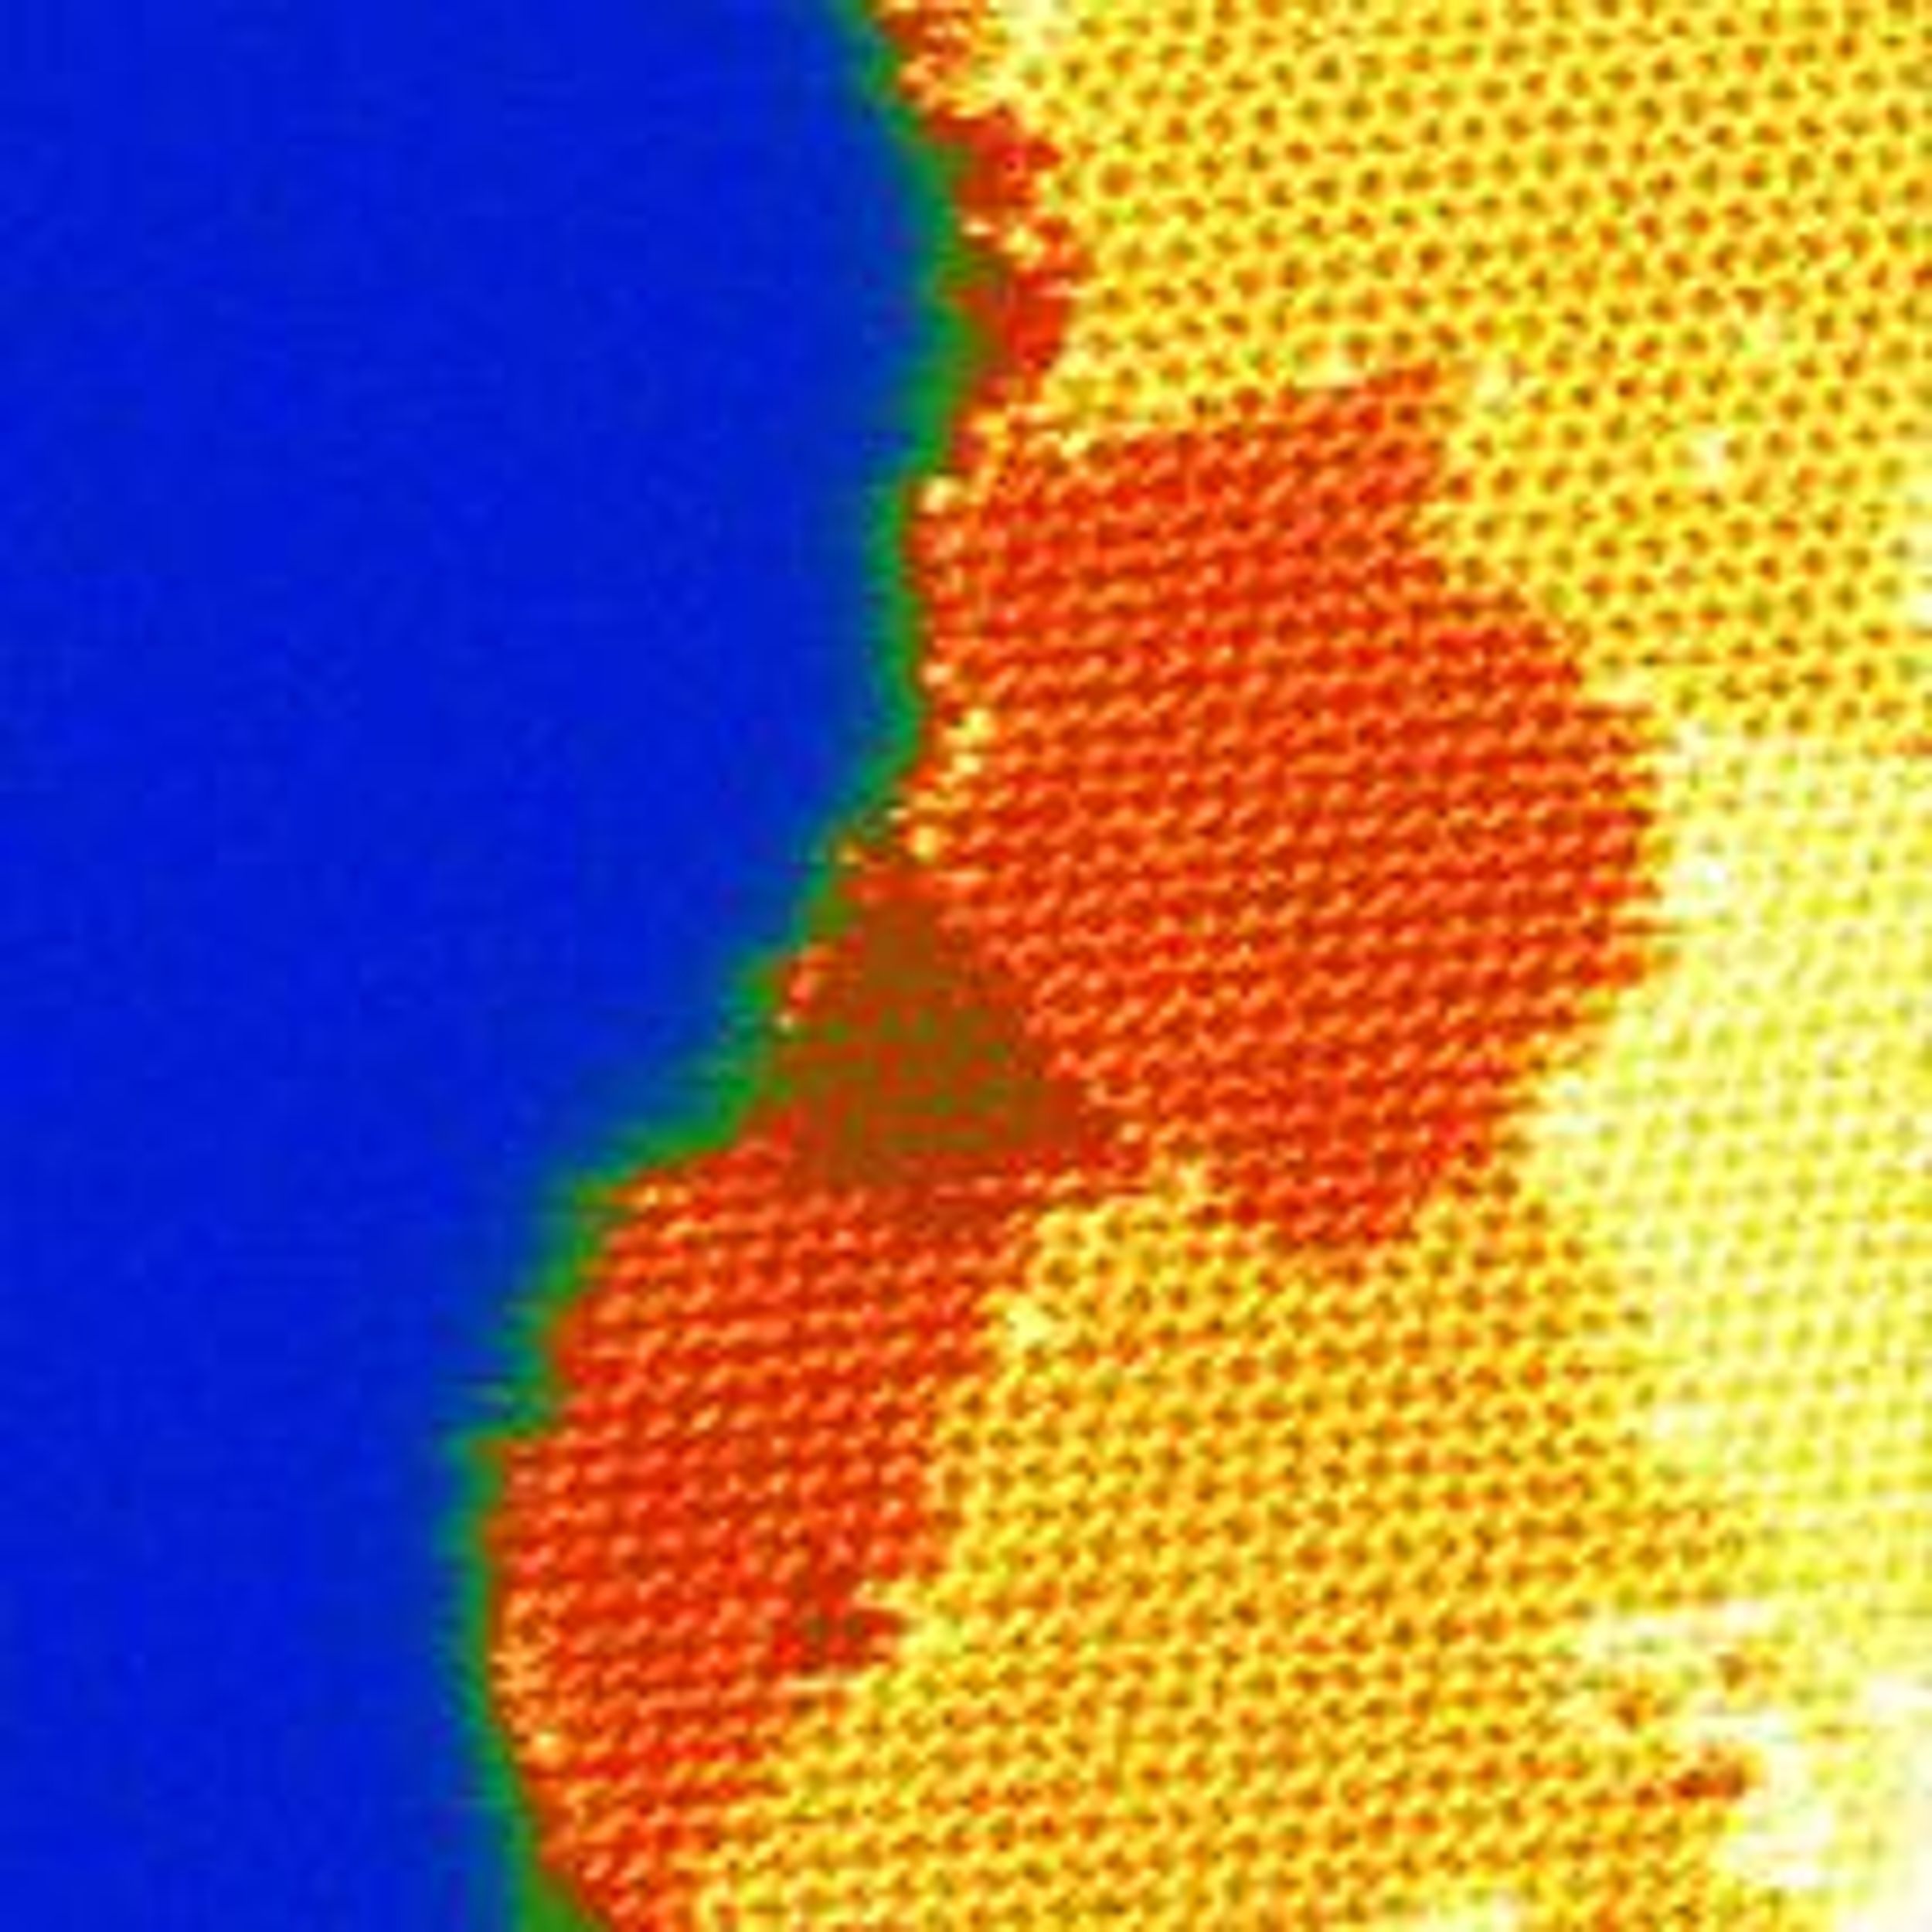 Nanosheets of Layered Materials Are Not Just for Graphite Anymore